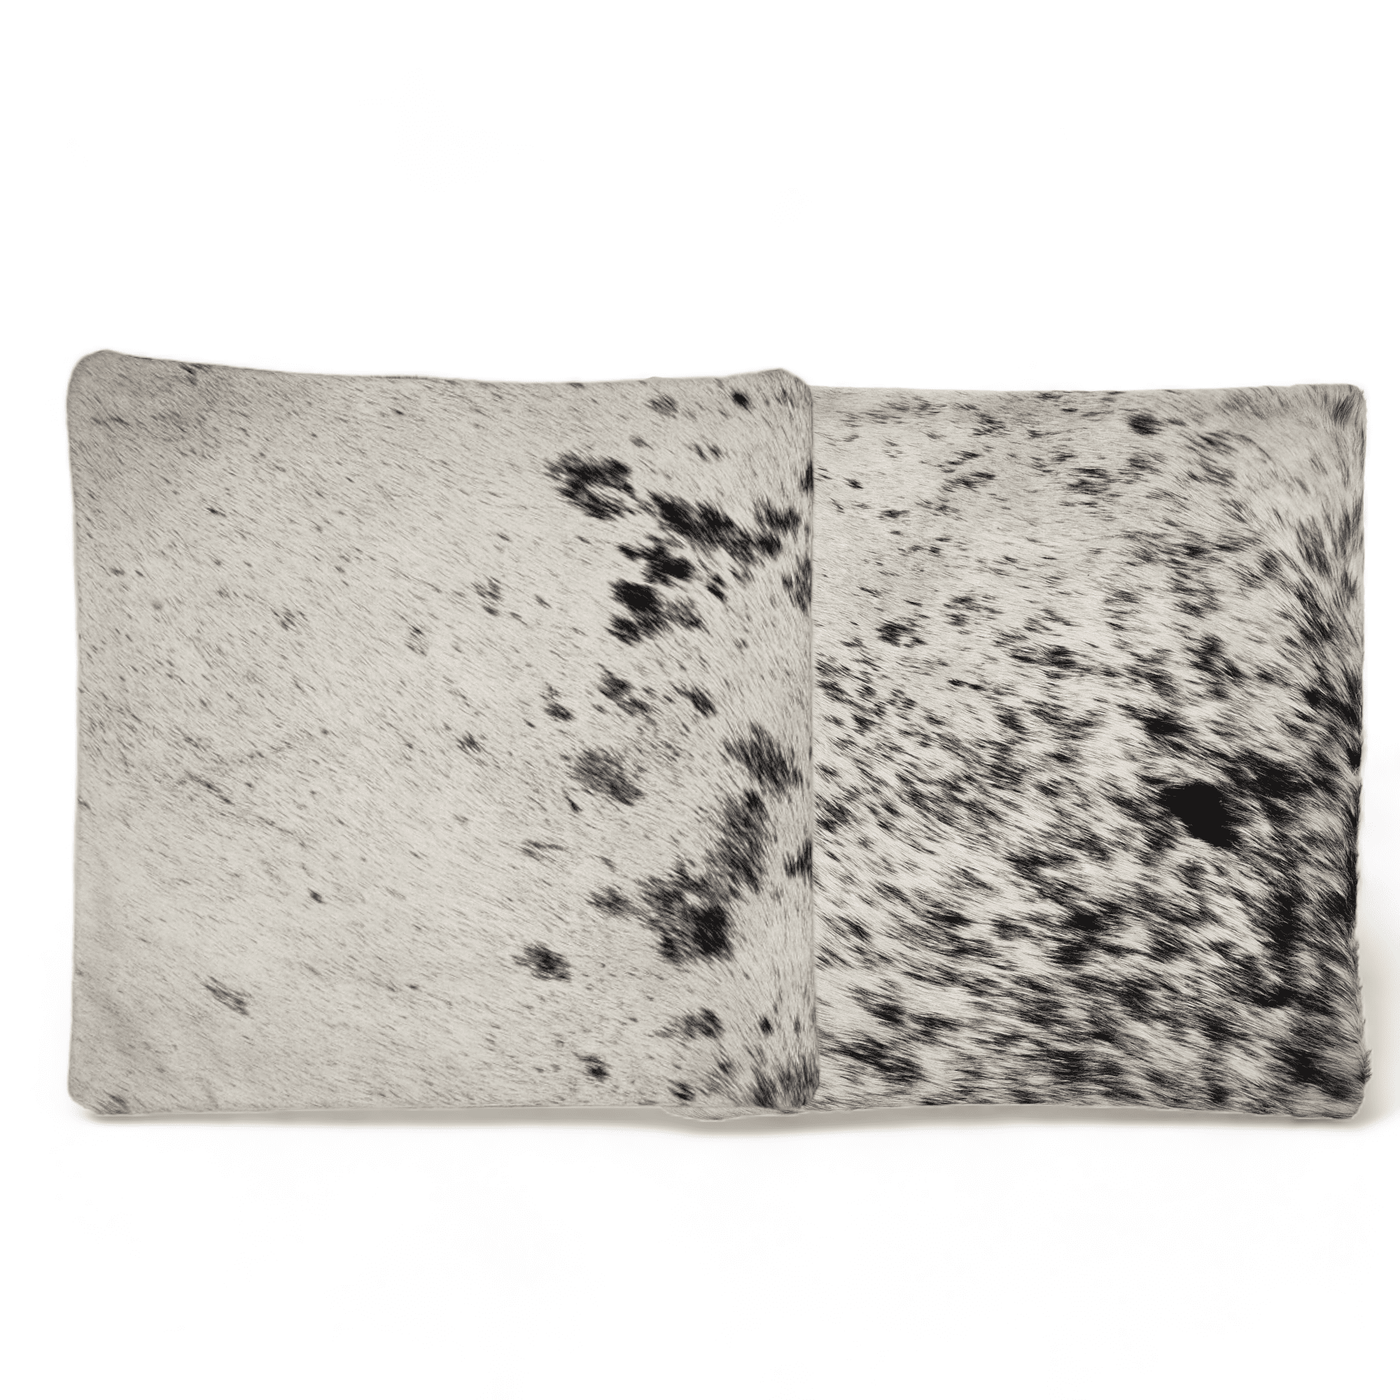 Highlands 18x18 Black/White Genuine Cowhide Pillow Covers Double Sided - Ranch Junkie Mercantile LLC